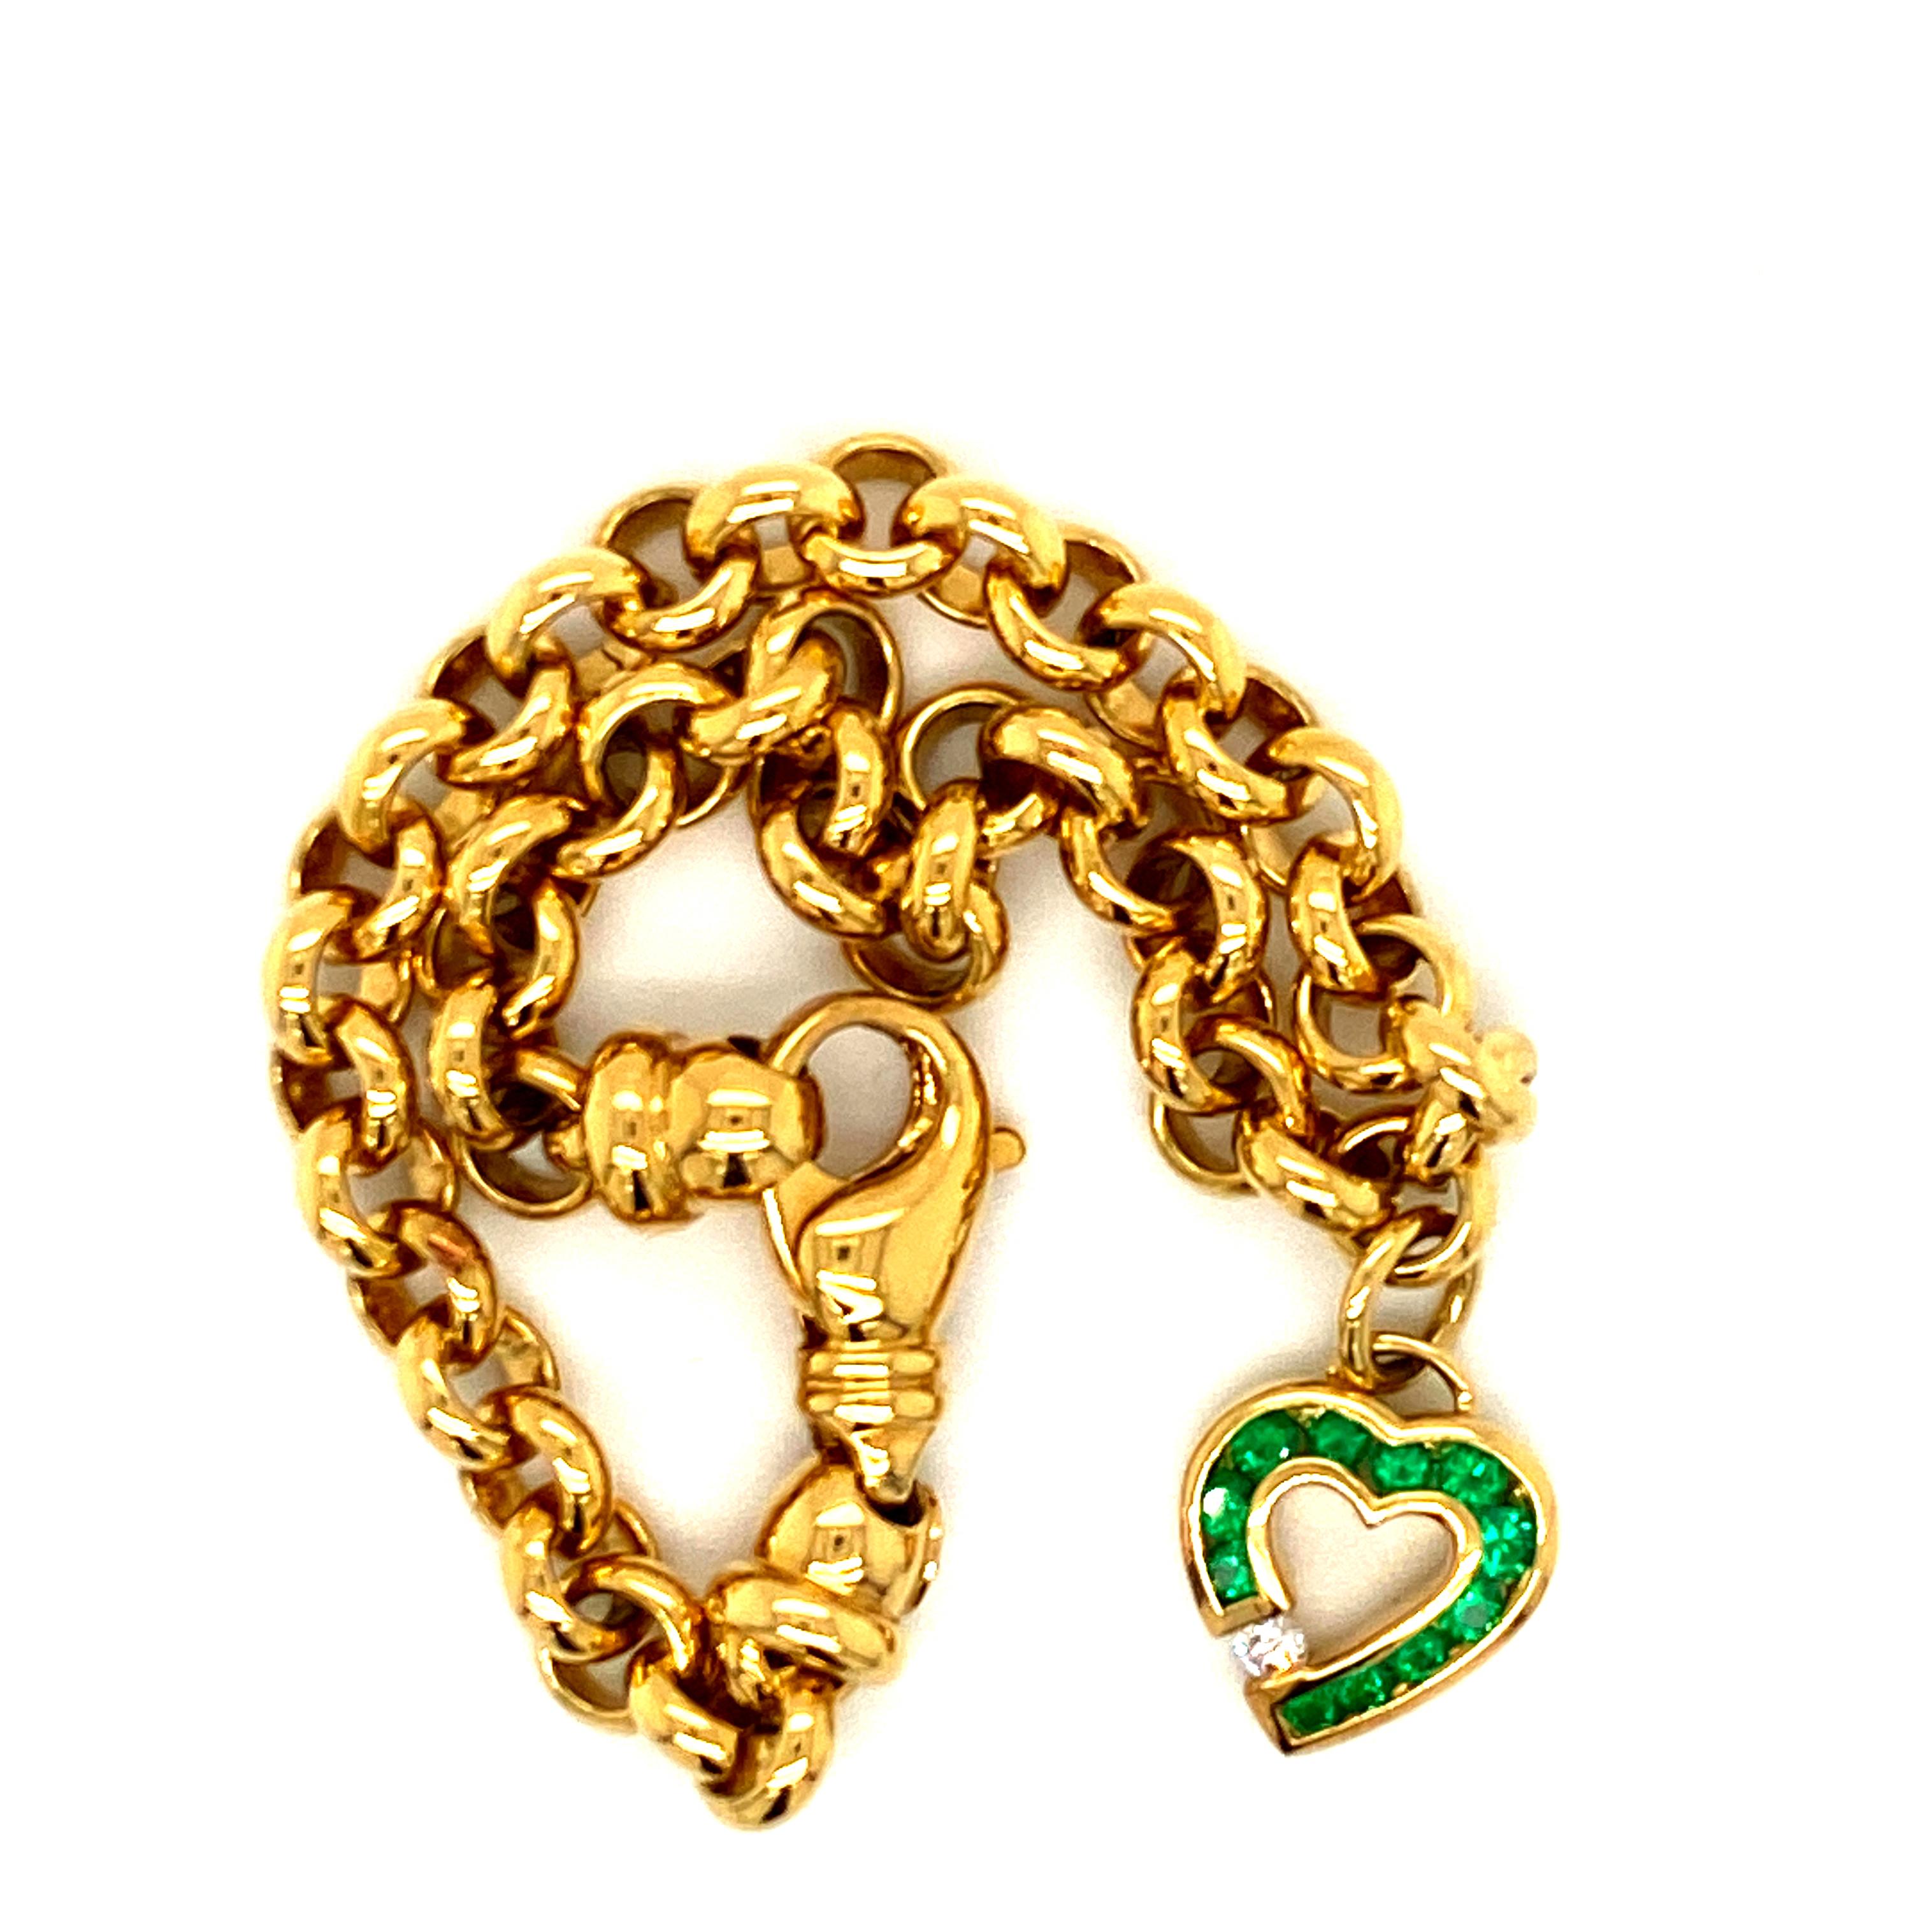 This Krypell 18k gold link charm bracelet contains 11 intensely green emeralds with at approximately 1/3ct total weight, accented by a single round brilliant diamond of approximately .05ct.  This charm, in Krypell's colored gemstone and single